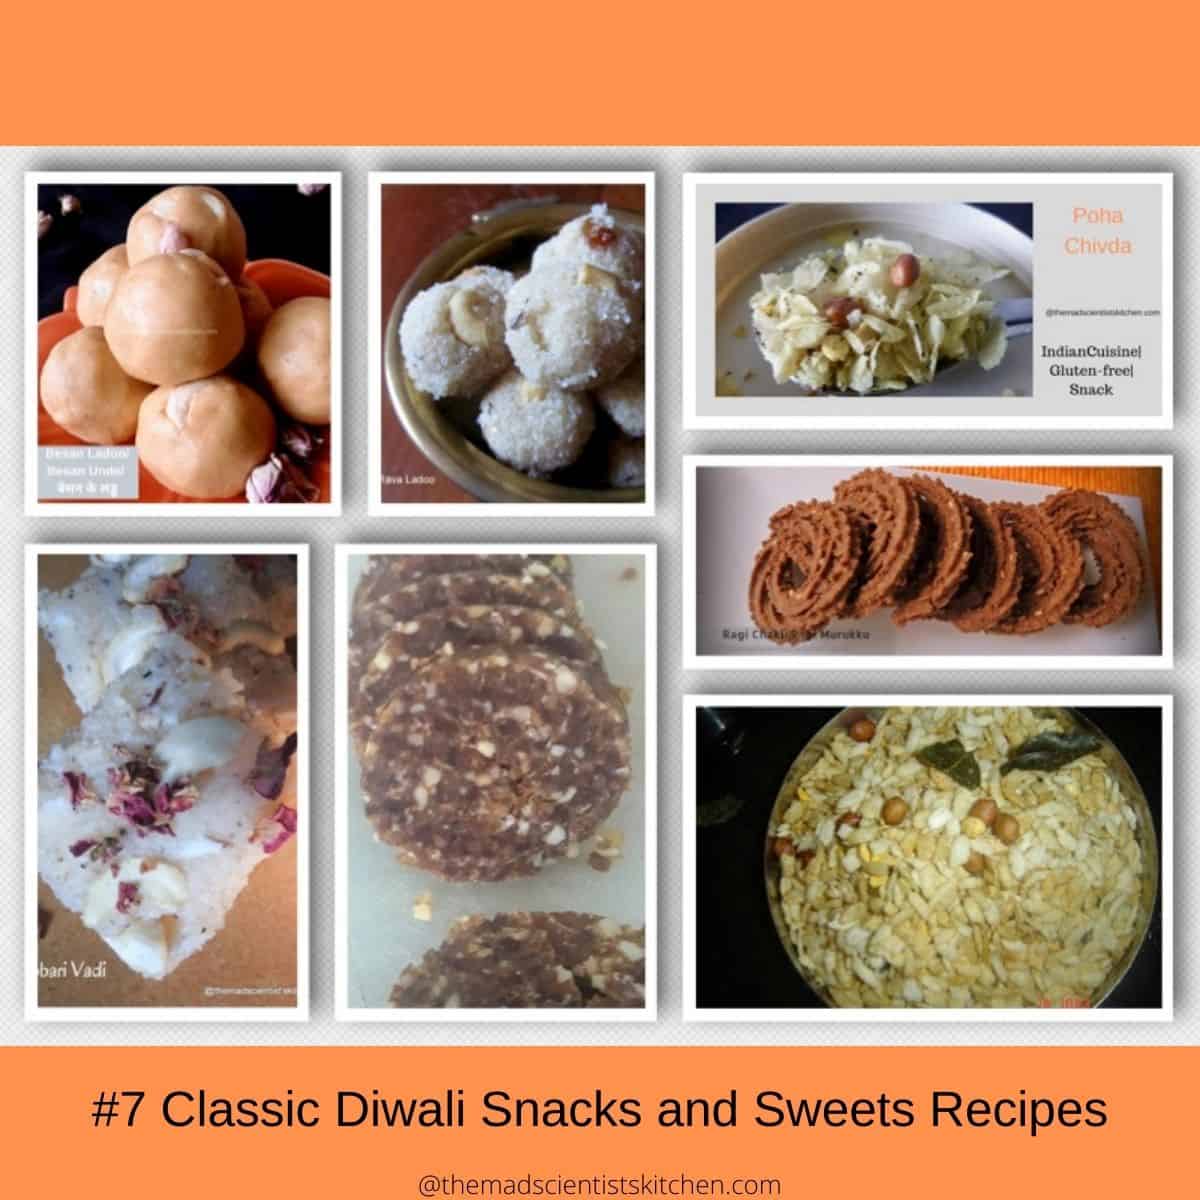 #7 Classic Diwali Snacks and Sweets Recipes